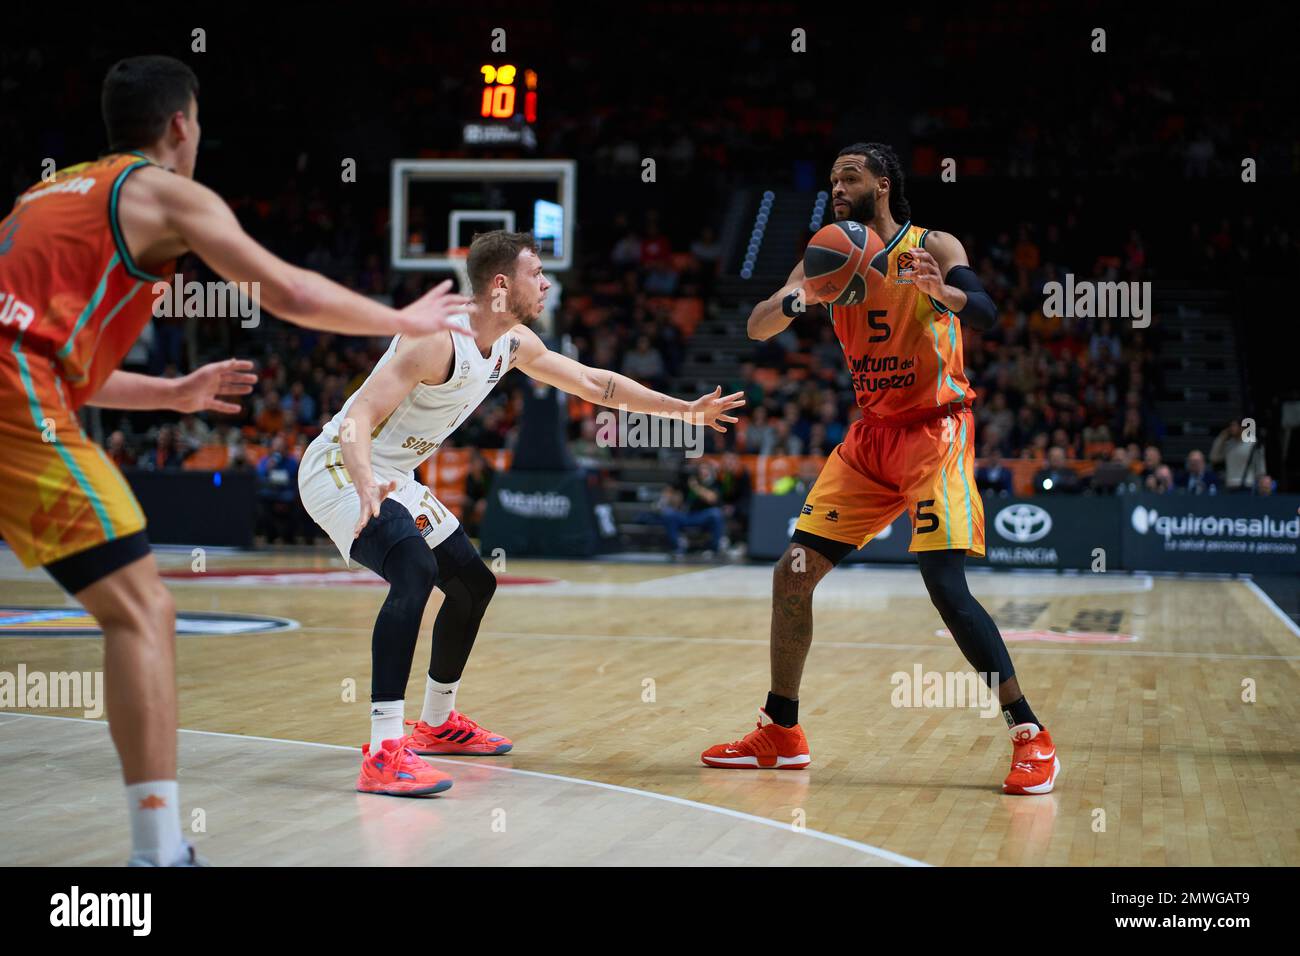 Valencia, Spain. 31st Jan, 2023. Jan Niklas Wimberg of FC Bayern Munich (C)  and James Web of Valencia basket (R) in action during the J22 Turkish  Airlines EuroLeague between Valencia Basket and